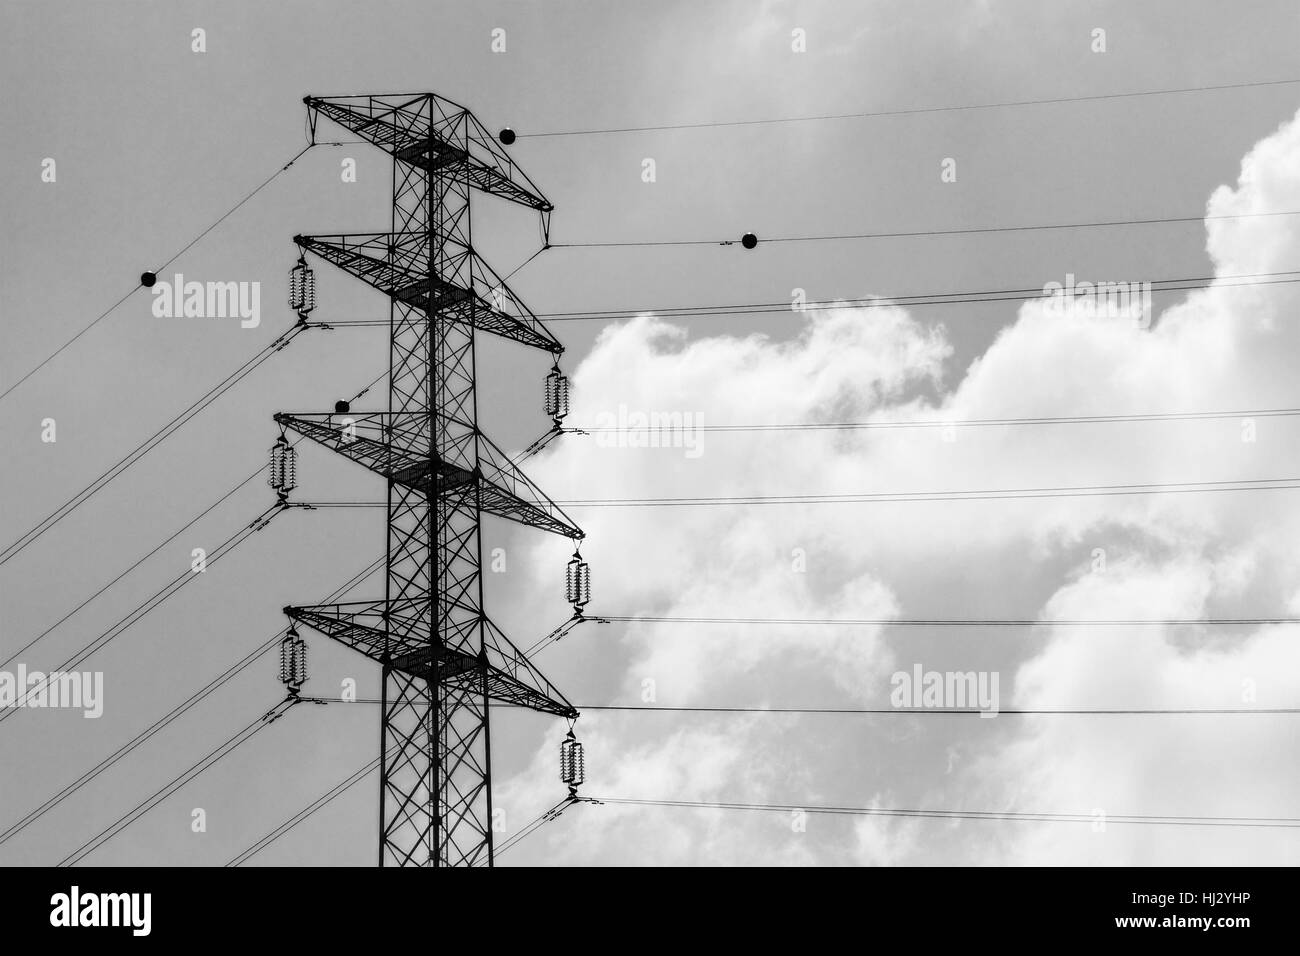 industry, energy, power, electricity, electric power, electric, post, pillar, Stock Photo